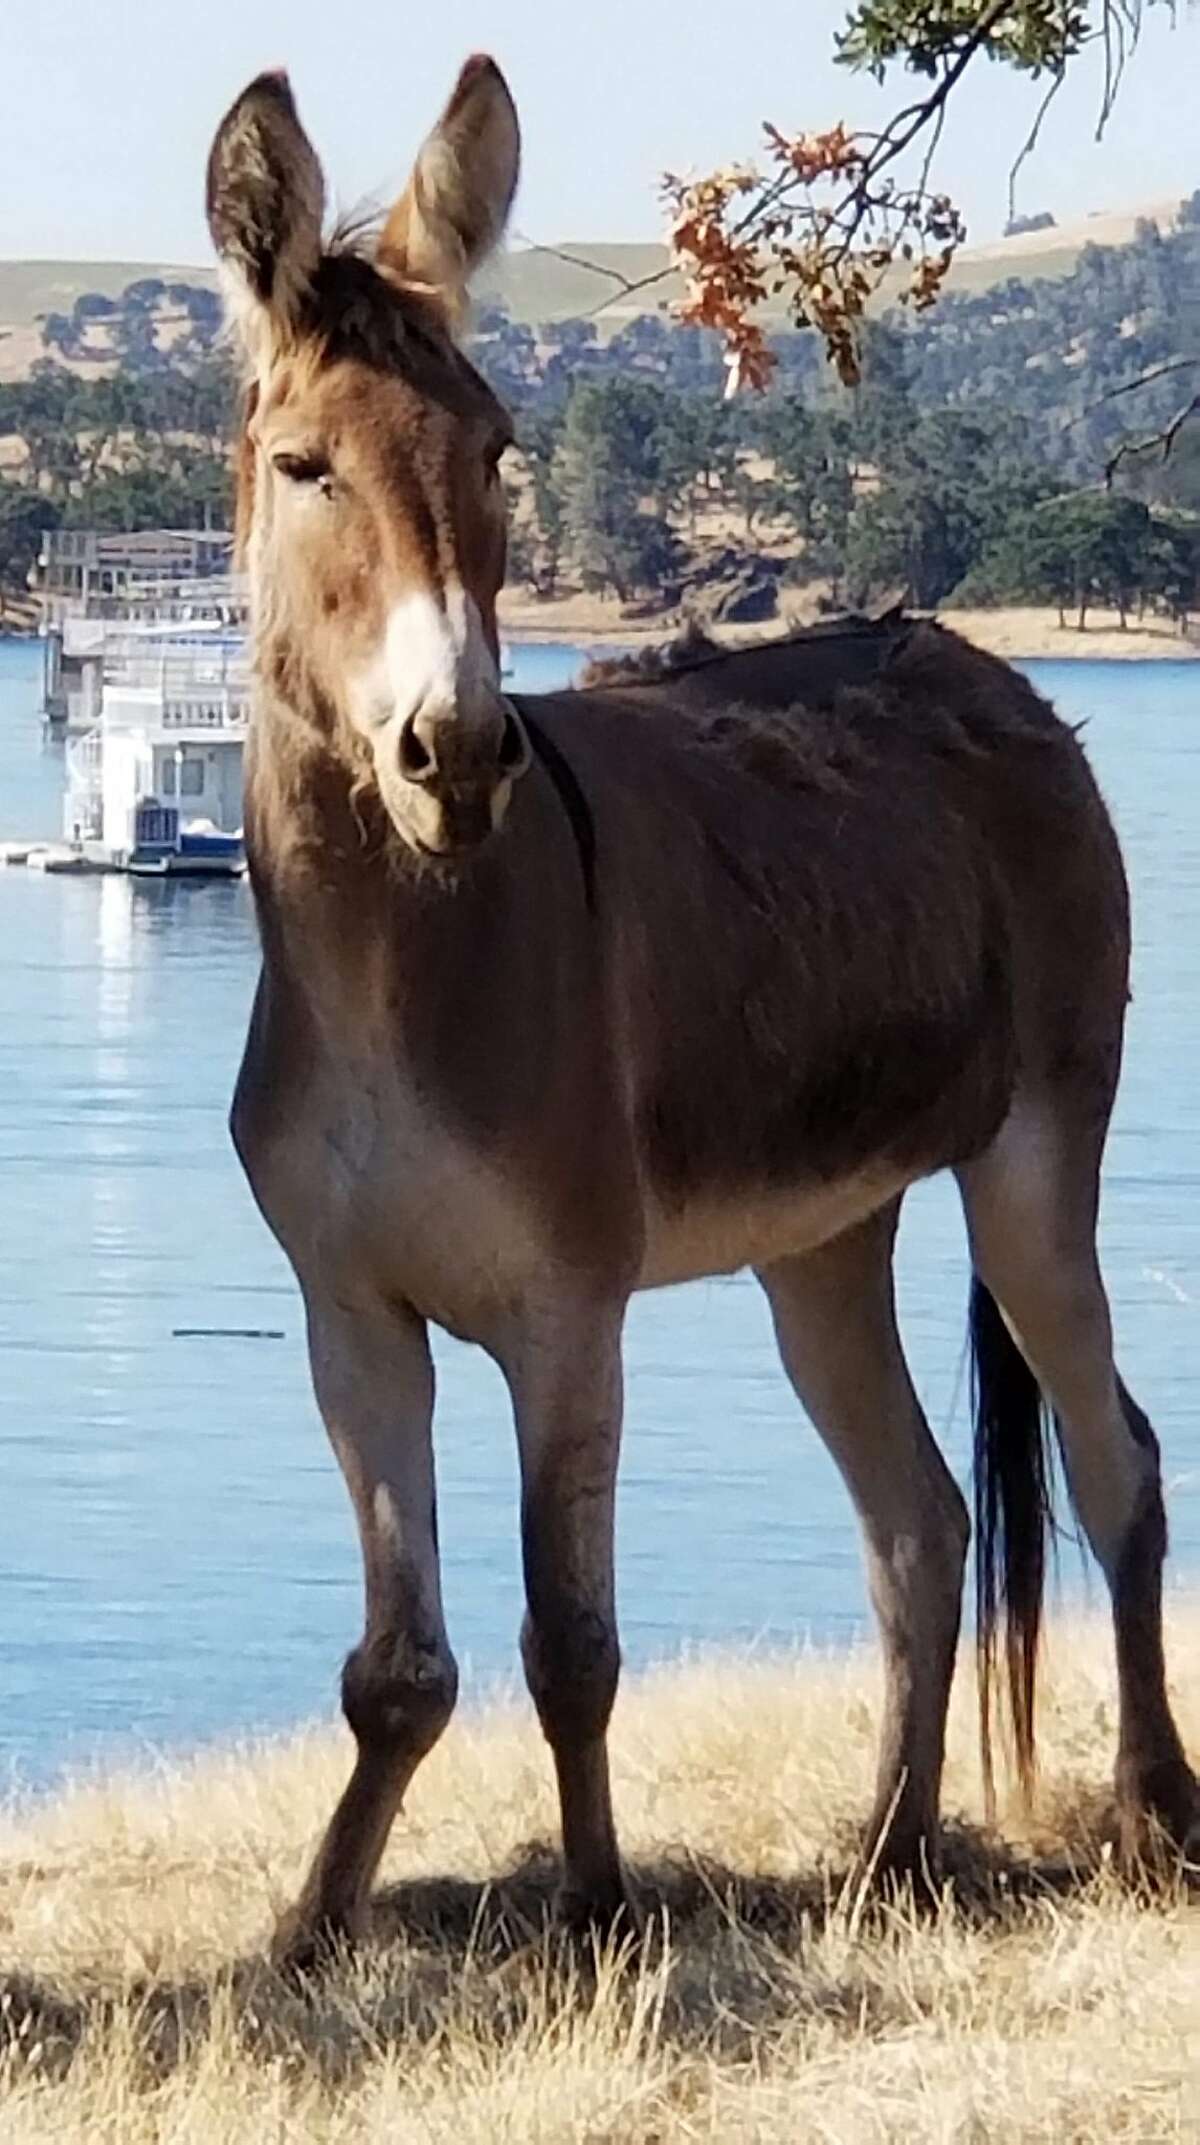 Pictured is "Hillary," a donkey which has become stranded on an island that formed in Lake McClure in Mariposa County after winter rains refiled the reservoir and "Hillary" became separated from the other donkeys in her herd. She has been living alone on the island for two years. Now, there is a rescue effort forming but it has become tangled in a discussion as to whether or not to remove her and if so, who would pay for it.